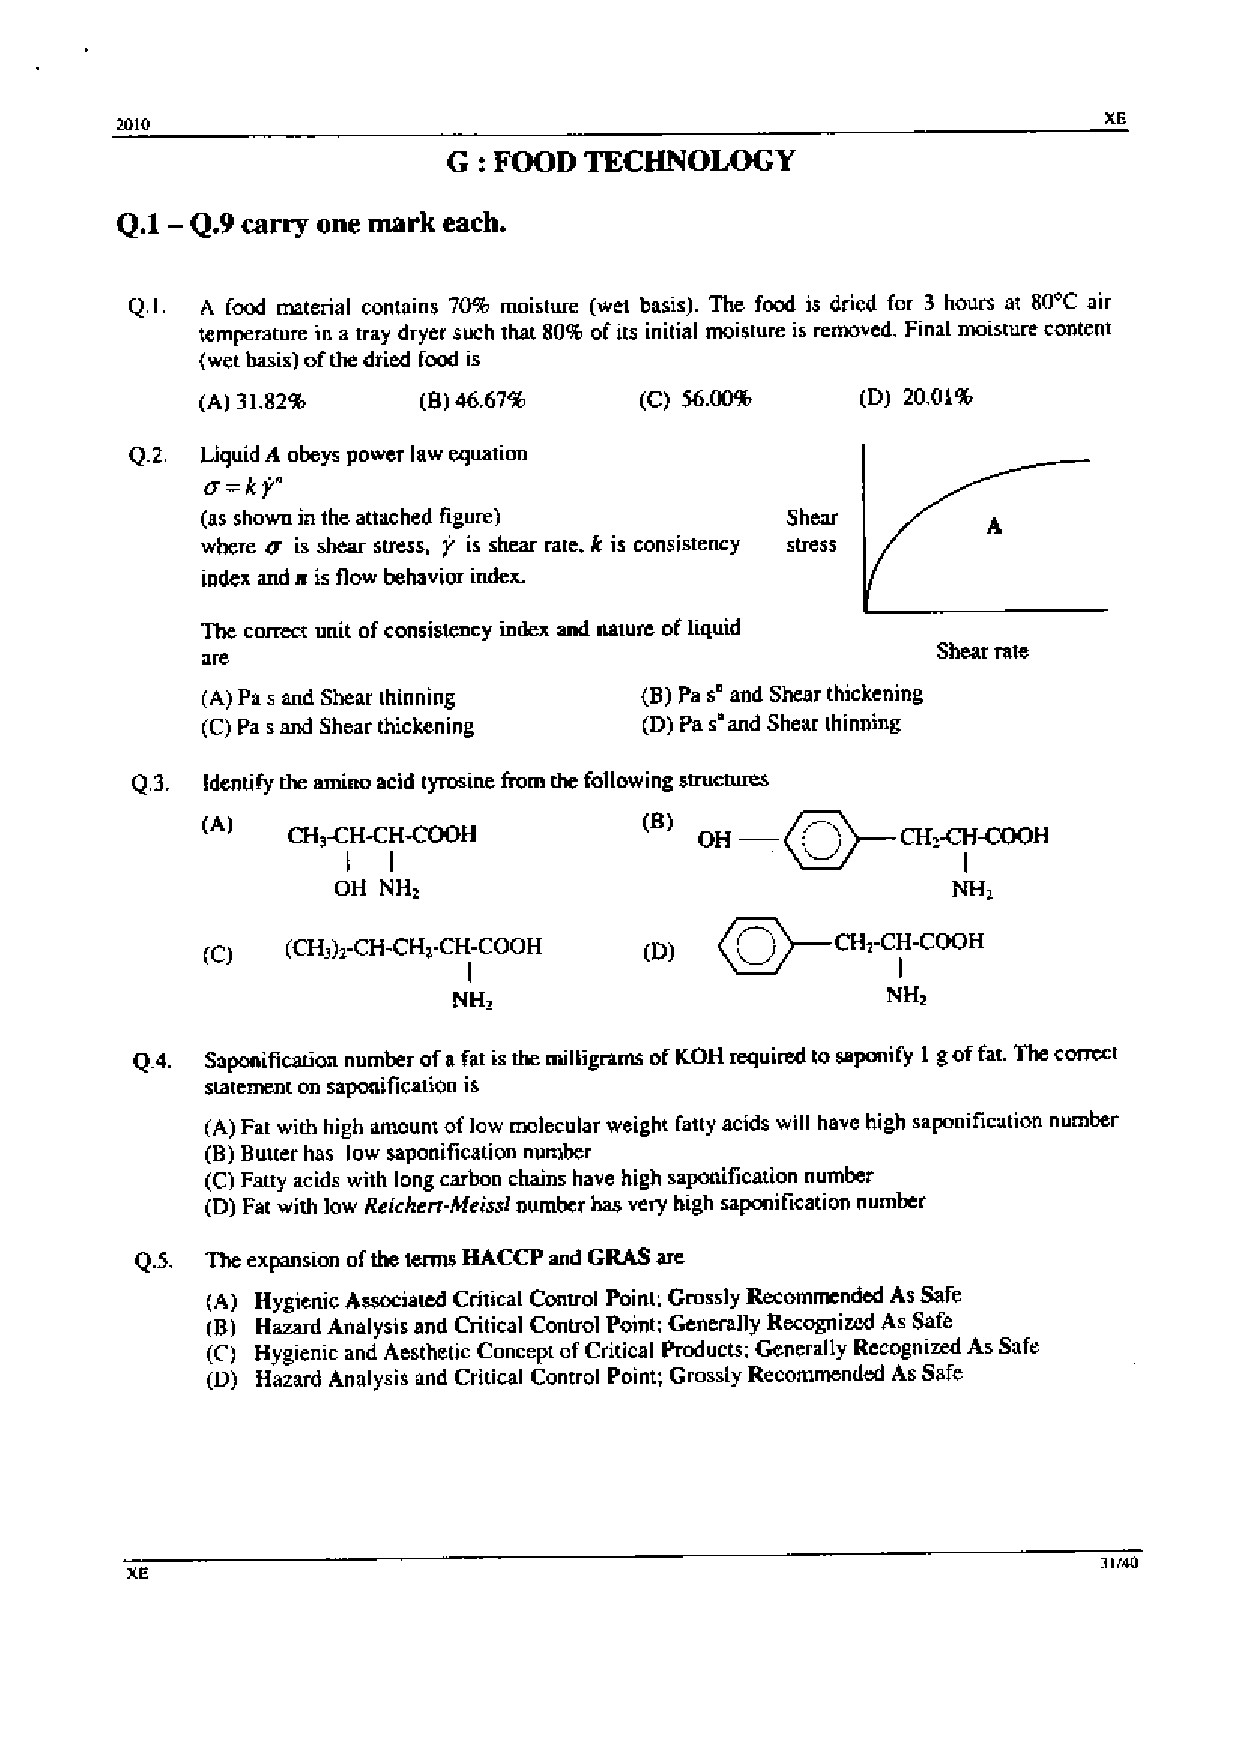 GATE Exam Question Paper 2010 Engineering Sciences 31